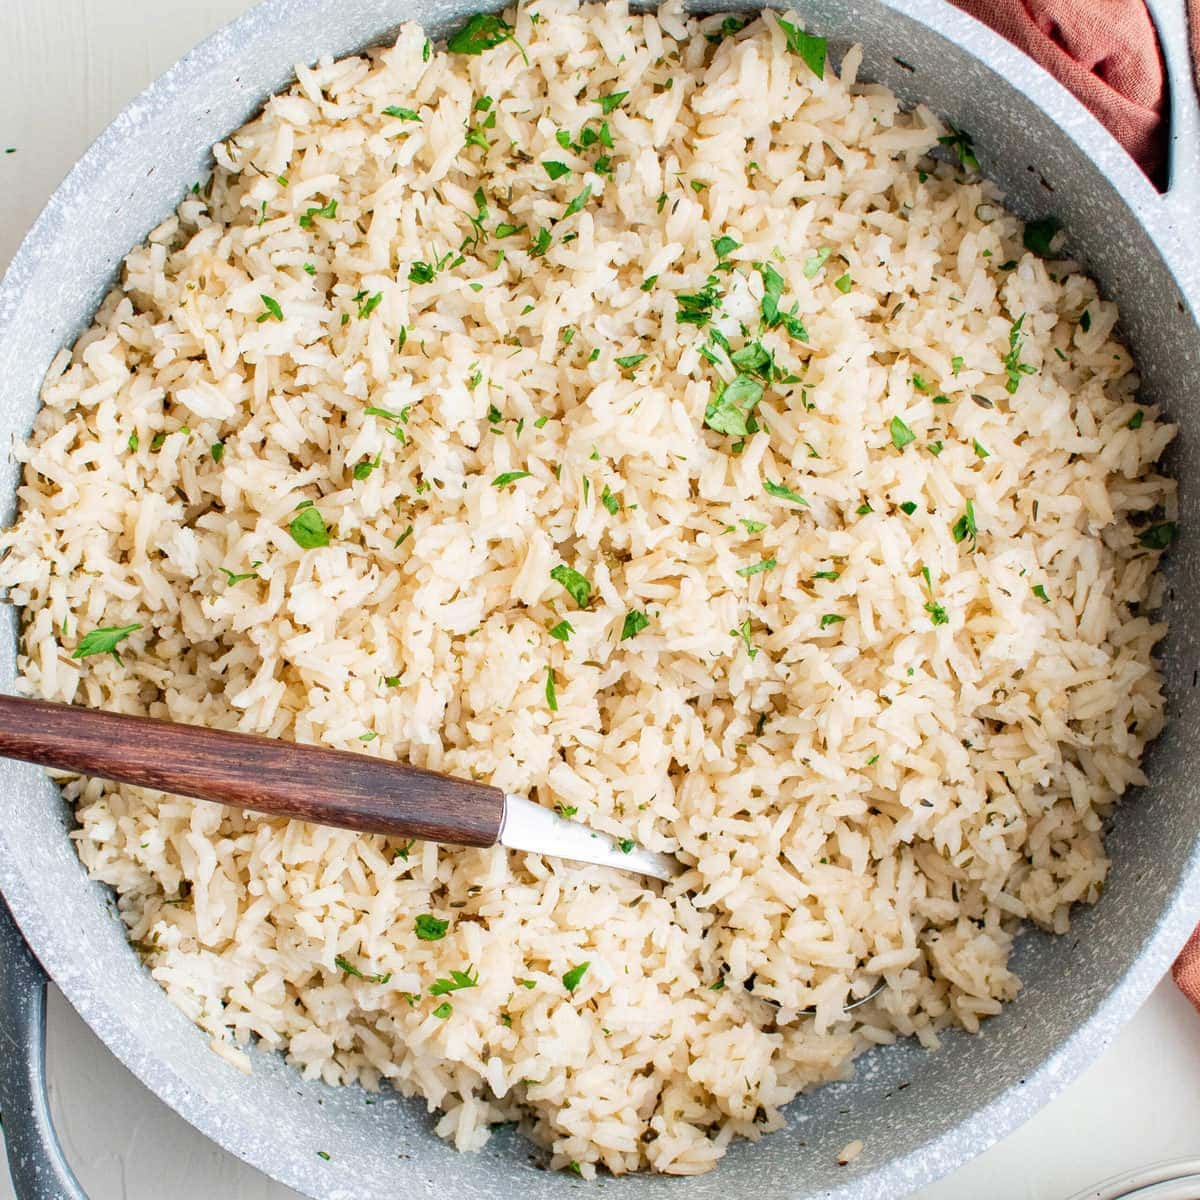 storage method - What's the best way to store rice long-term? - Seasoned  Advice